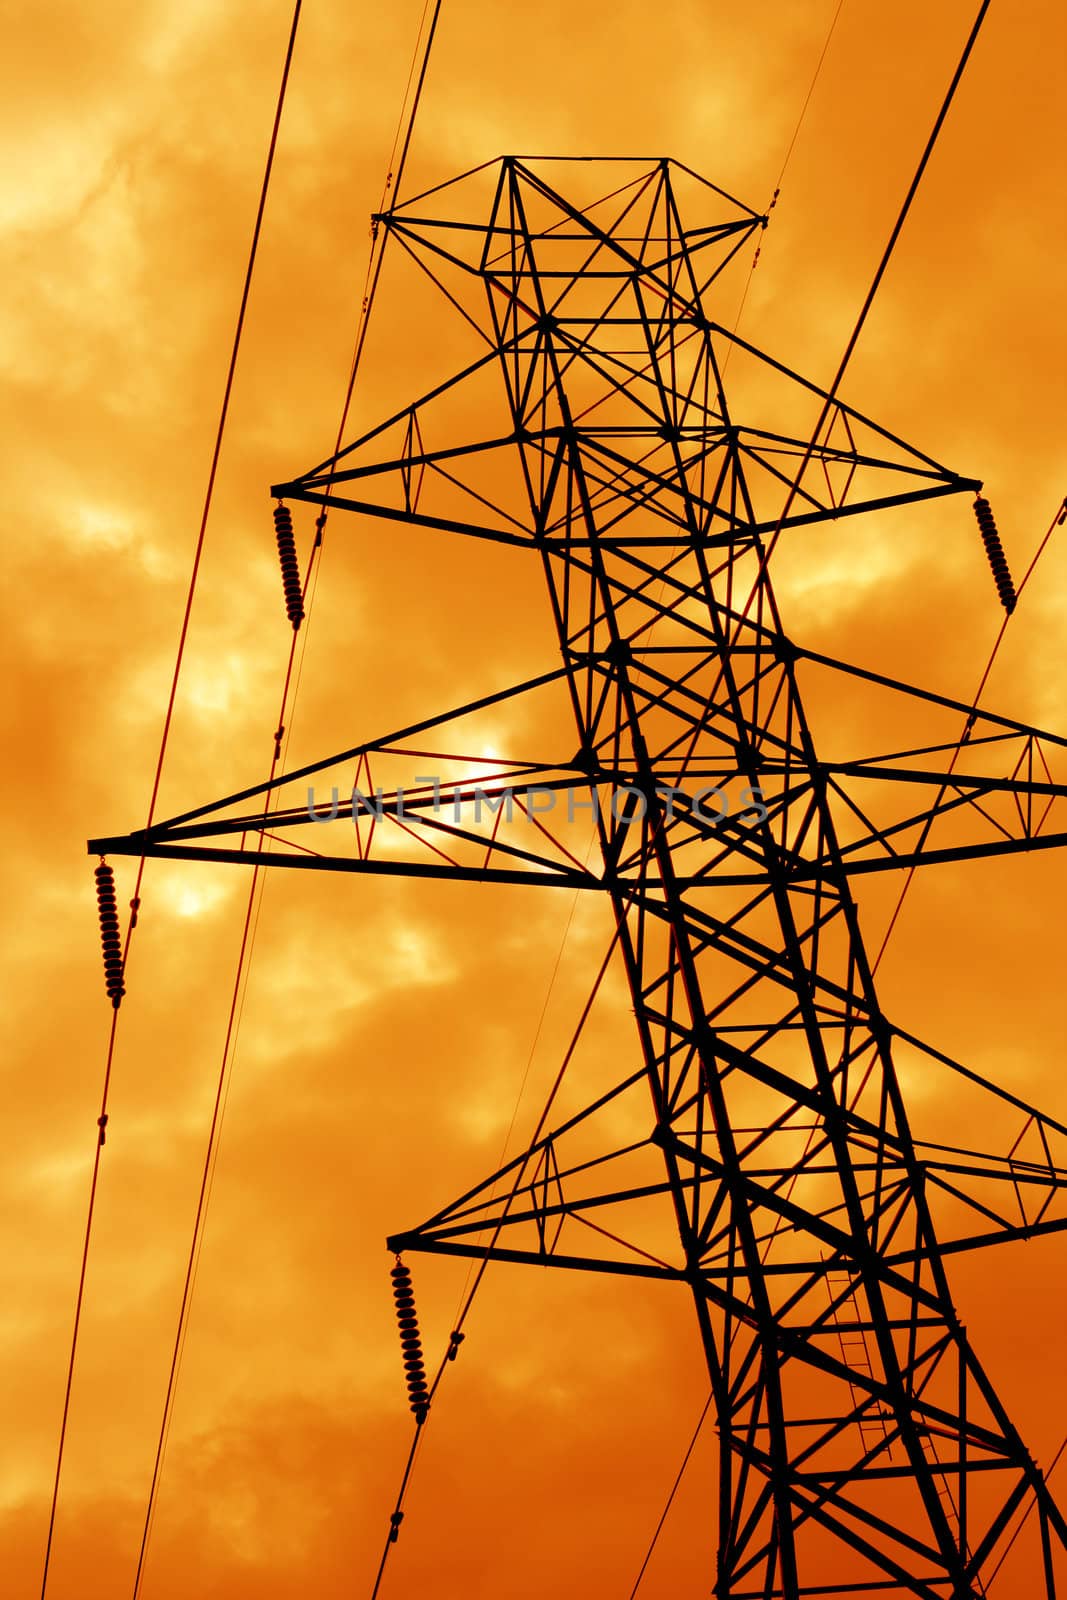 The silhouette of a power line tower against an ominous orange sky.